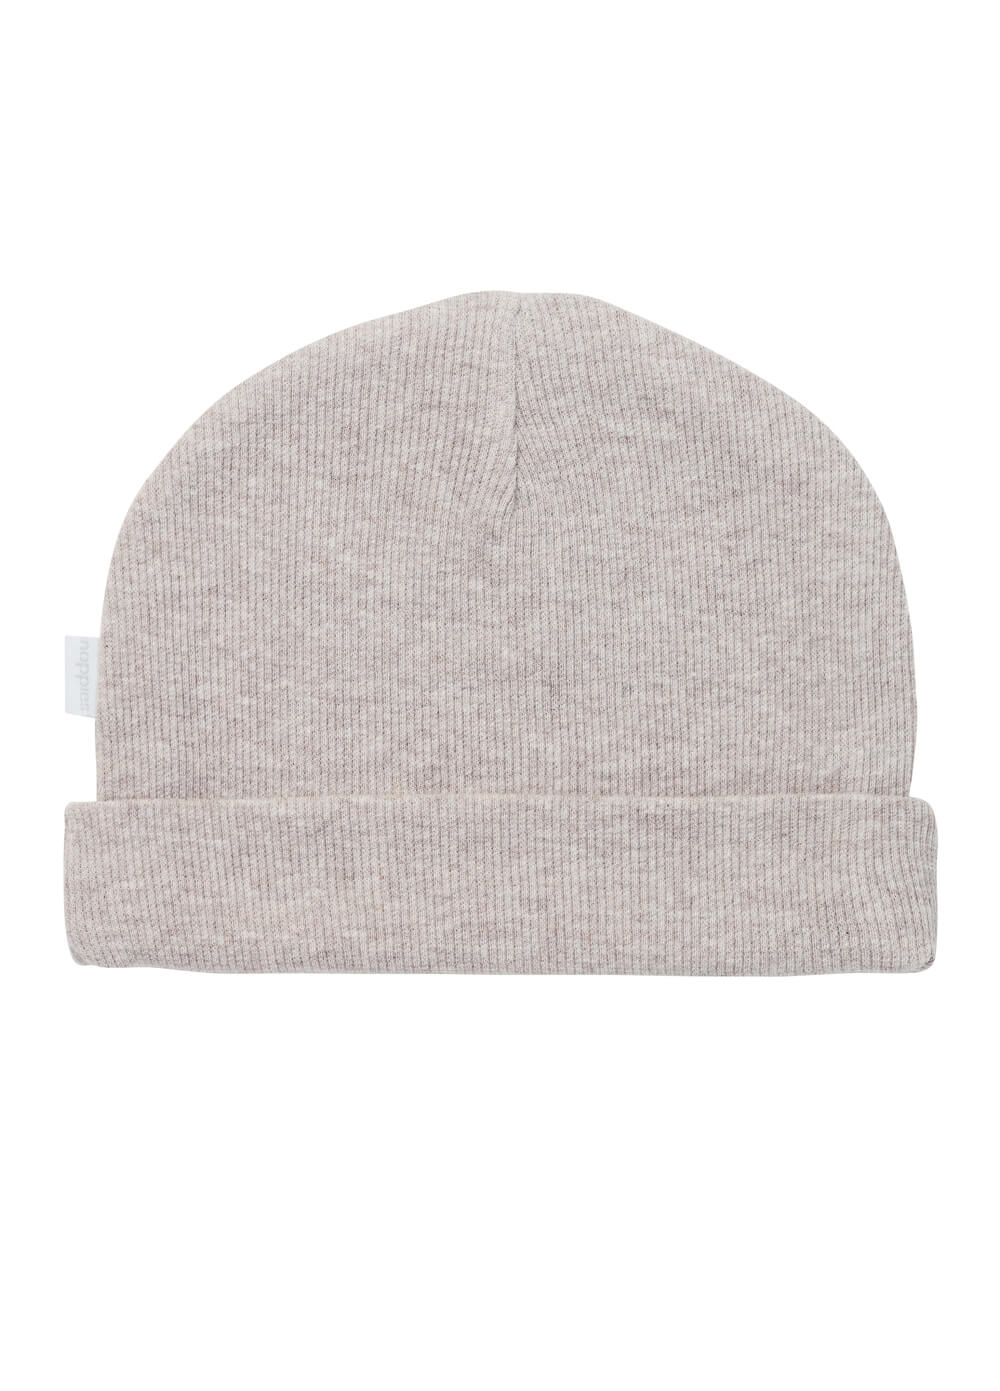 Nevel Organic Cotton Newborn Beanie in Taupe by Noppies Baby